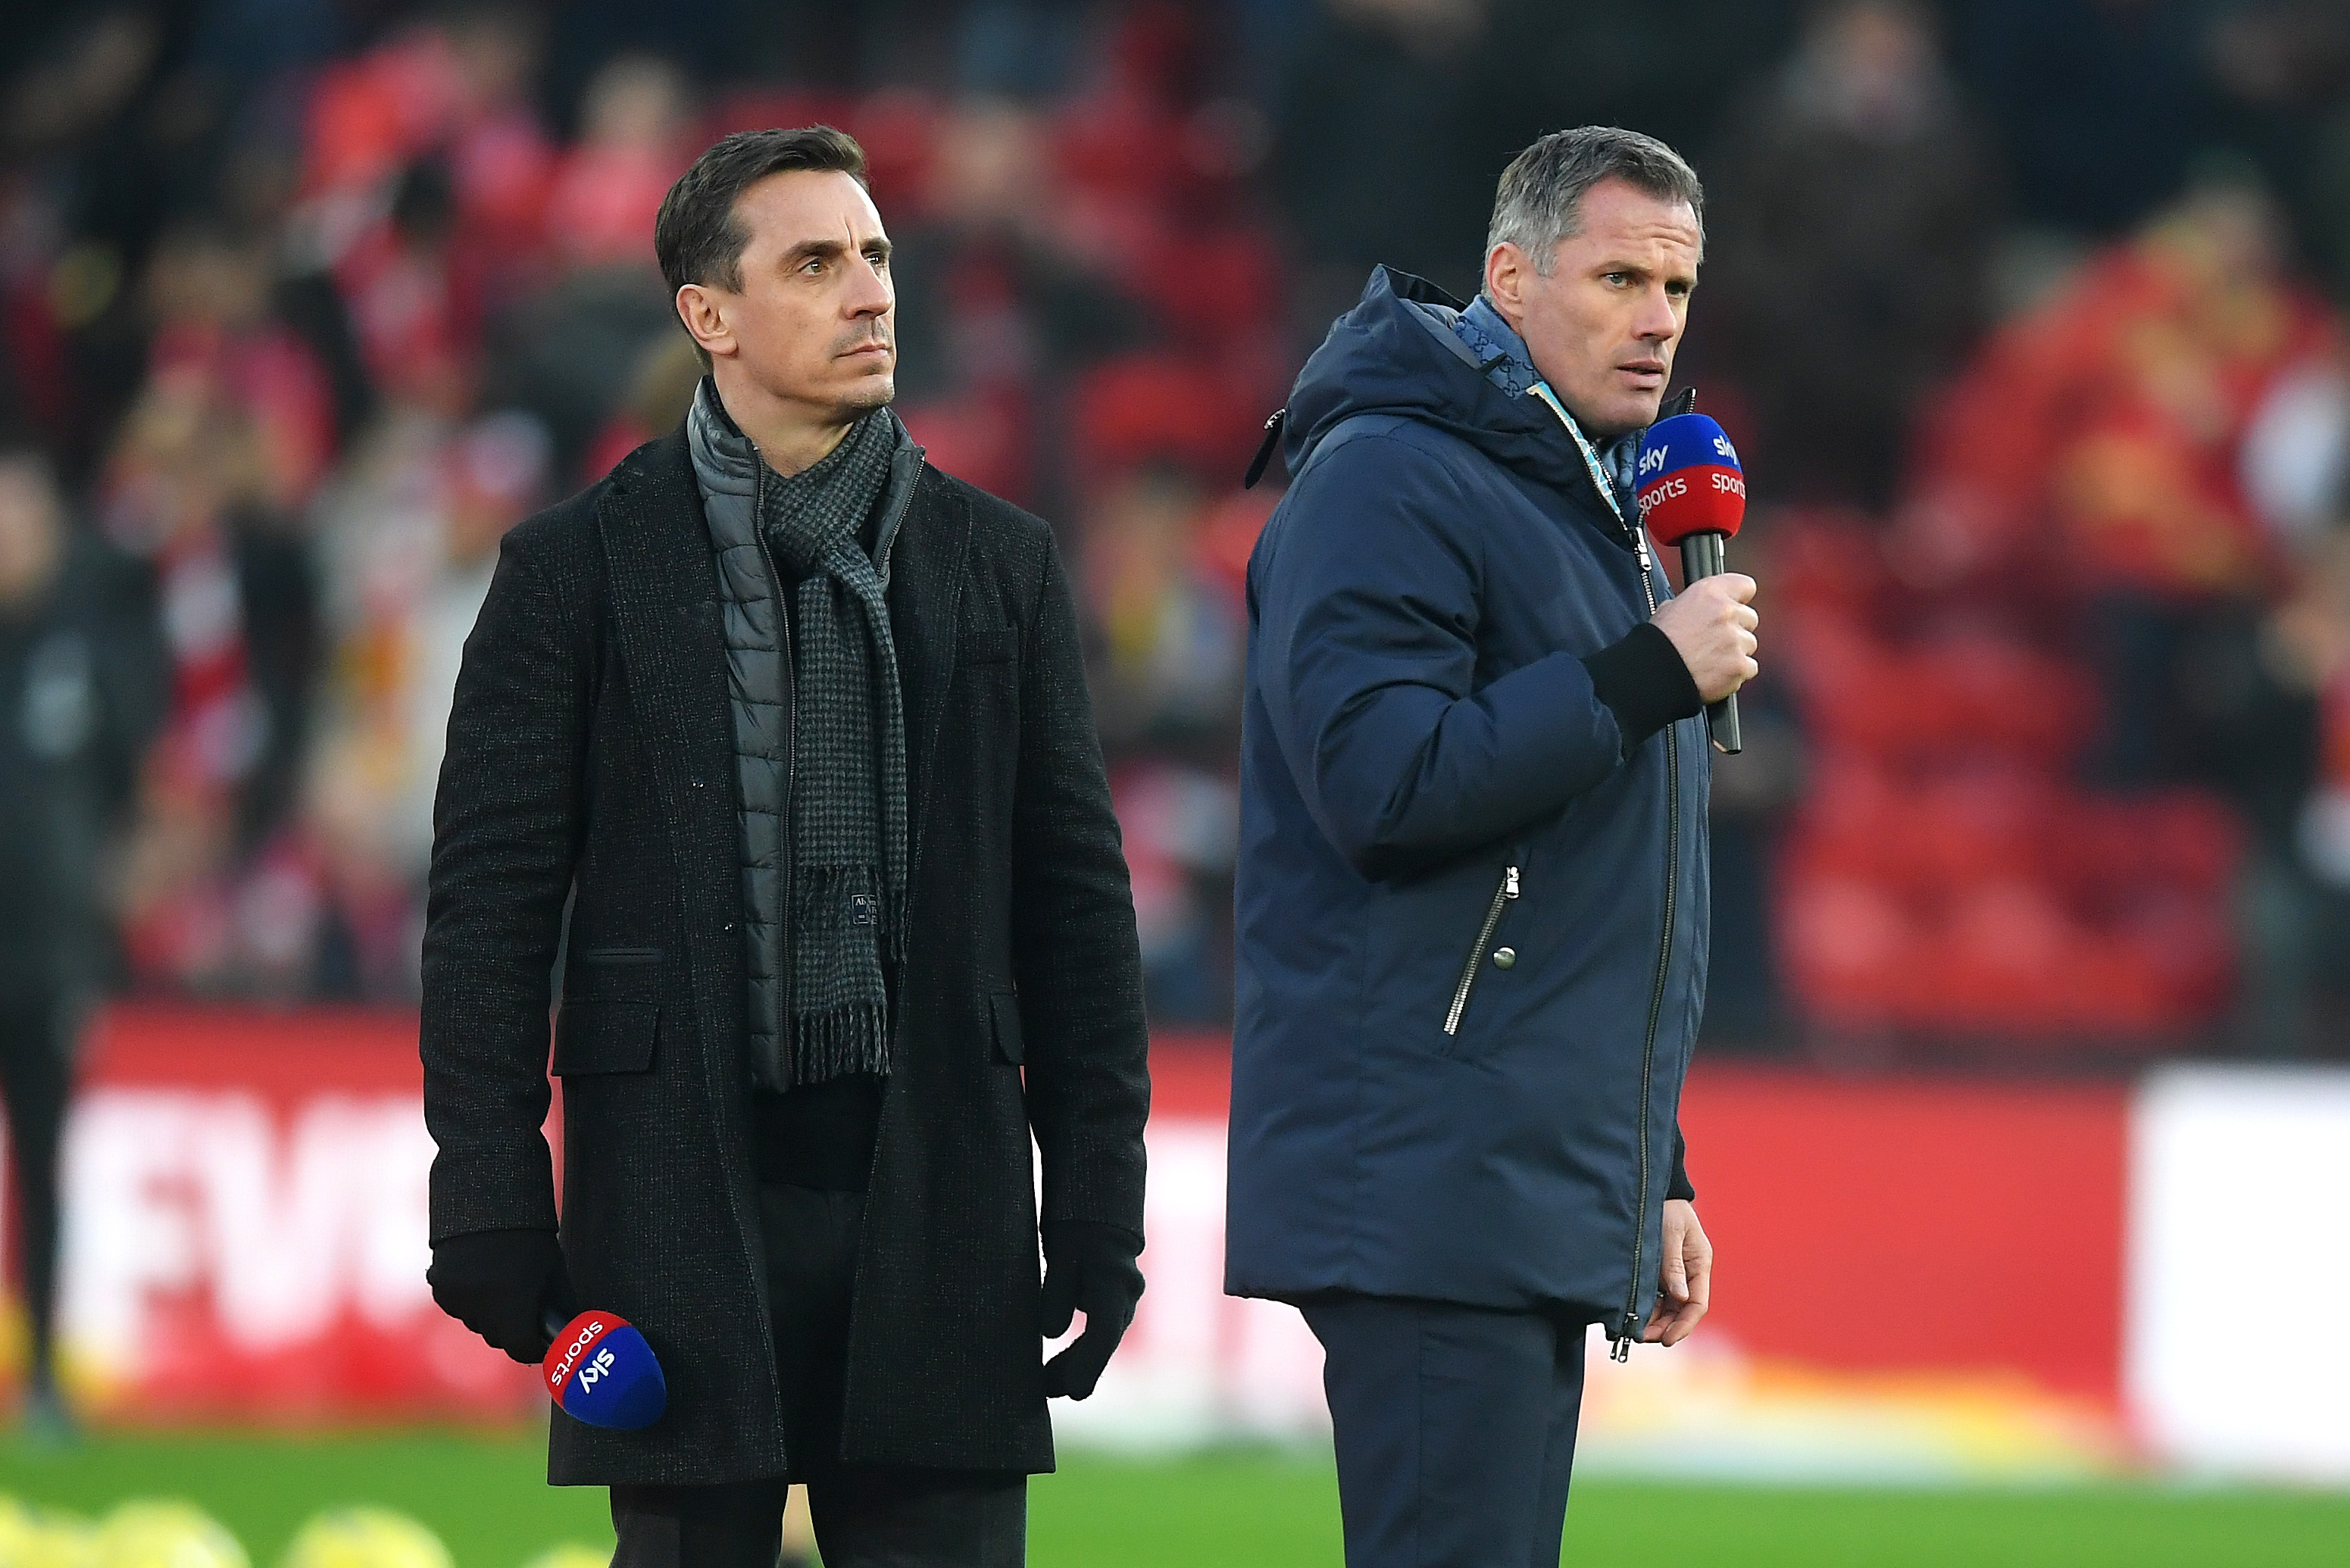 Jamie Carragher highlights Gary Neville’s hypocrisy regarding Manchester United’s managerial situation